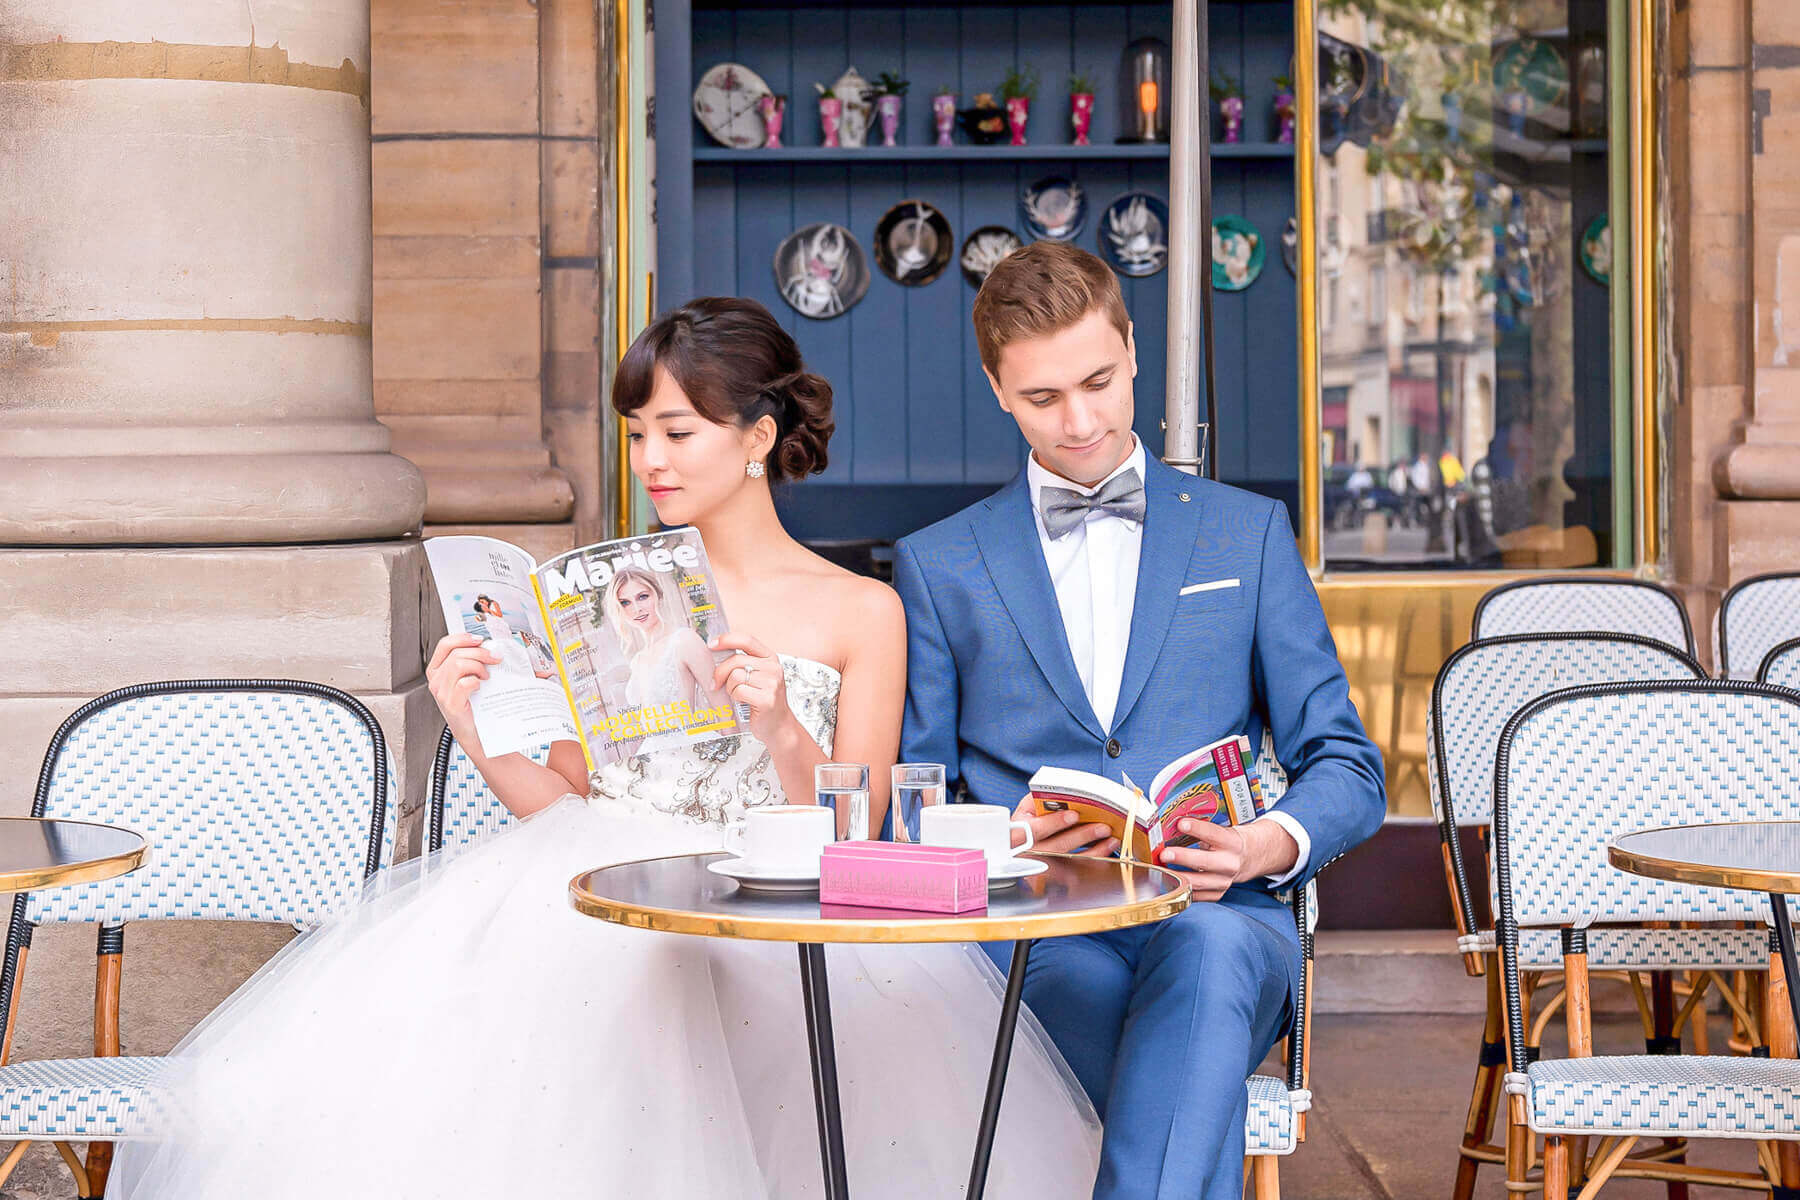 Happy couple enjoying coffee and macarons at a picturesque cafe, reading together in charming cafe engagement photos.